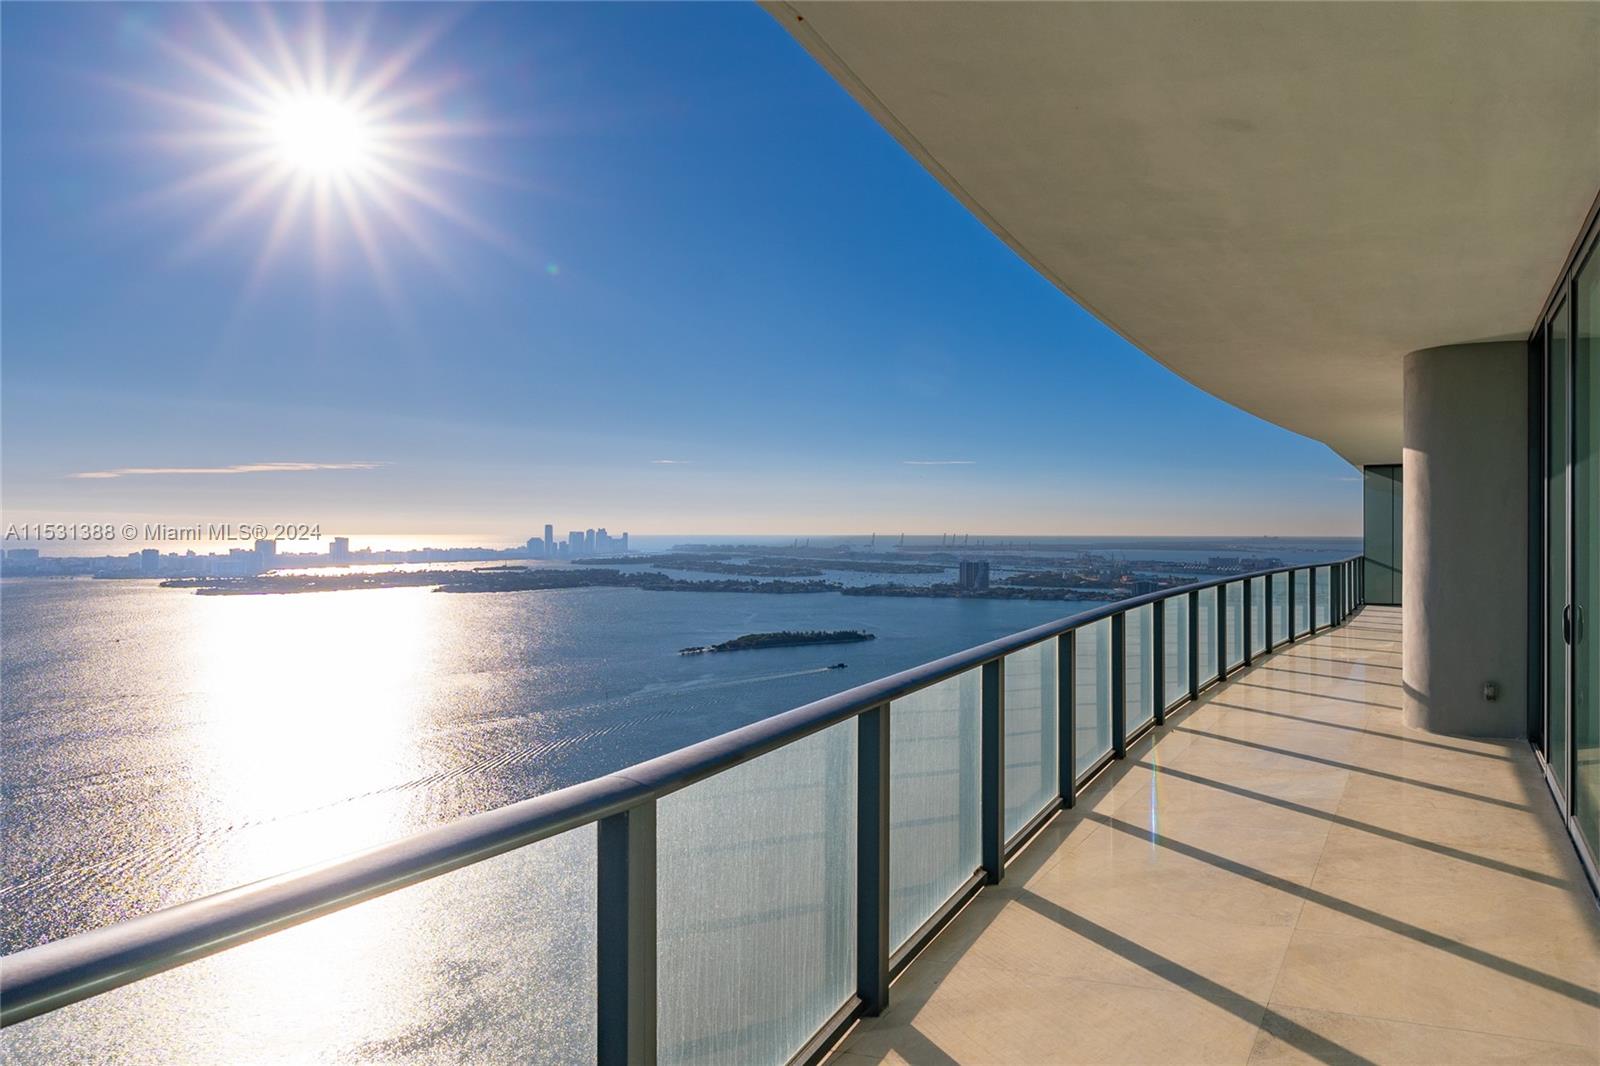 This breathtaking Penthouse on the 50th floor boasts endless Ocean and Bay views, epitomizing the essence of Miami luxury. This exquisite and expansive 4BD/5.5BA 2,887 SF residence has 600 SF terraces for magical sunrise and sunset views. Features include floor-to-ceiling windows, a sleek modern kitchen, marble and porcelain flooring, and electric window treatments. The spacious primary bedroom, walk-in closets, and opulent primary bath with its separate soaking tub and shower.  Located in the coveted Edgewater neighborhood, you're minutes from the vibrant Downtown Miami, South Beach, MIA Aiport, and so much more. Paraiso residents enjoy the resort-style amenities, including a sprawling pool deck with cabanas, a beach club, a state-of-the-art fitness & wellness center, and much more.